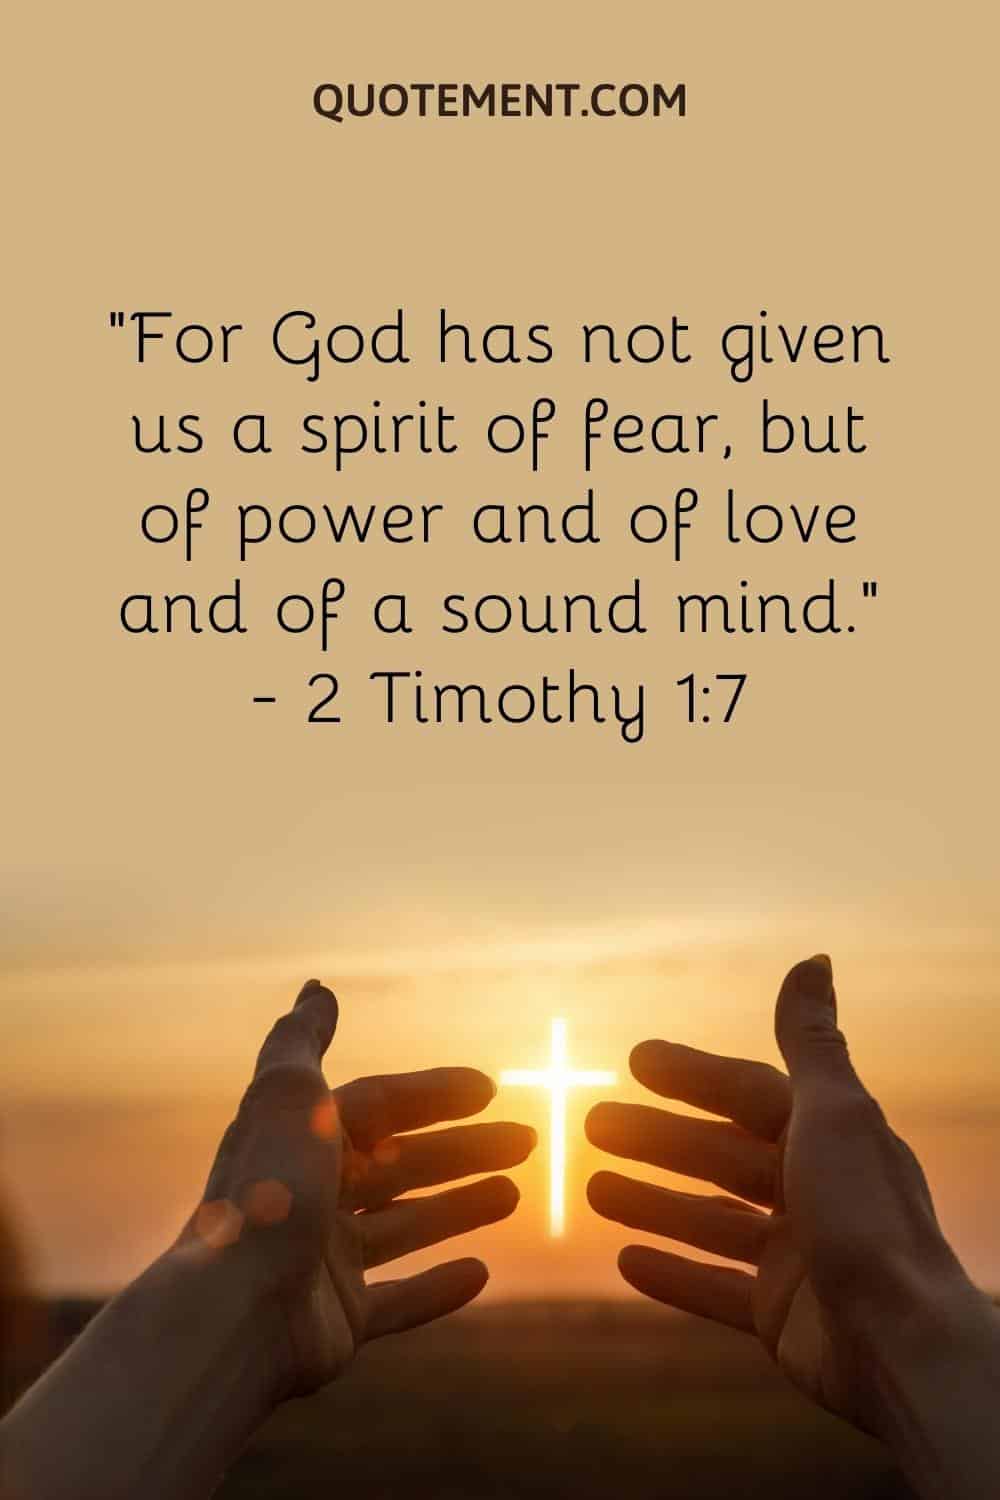 “For God has not given us a spirit of fear, but of power and of love and of a sound mind.” — 2 Timothy 17
